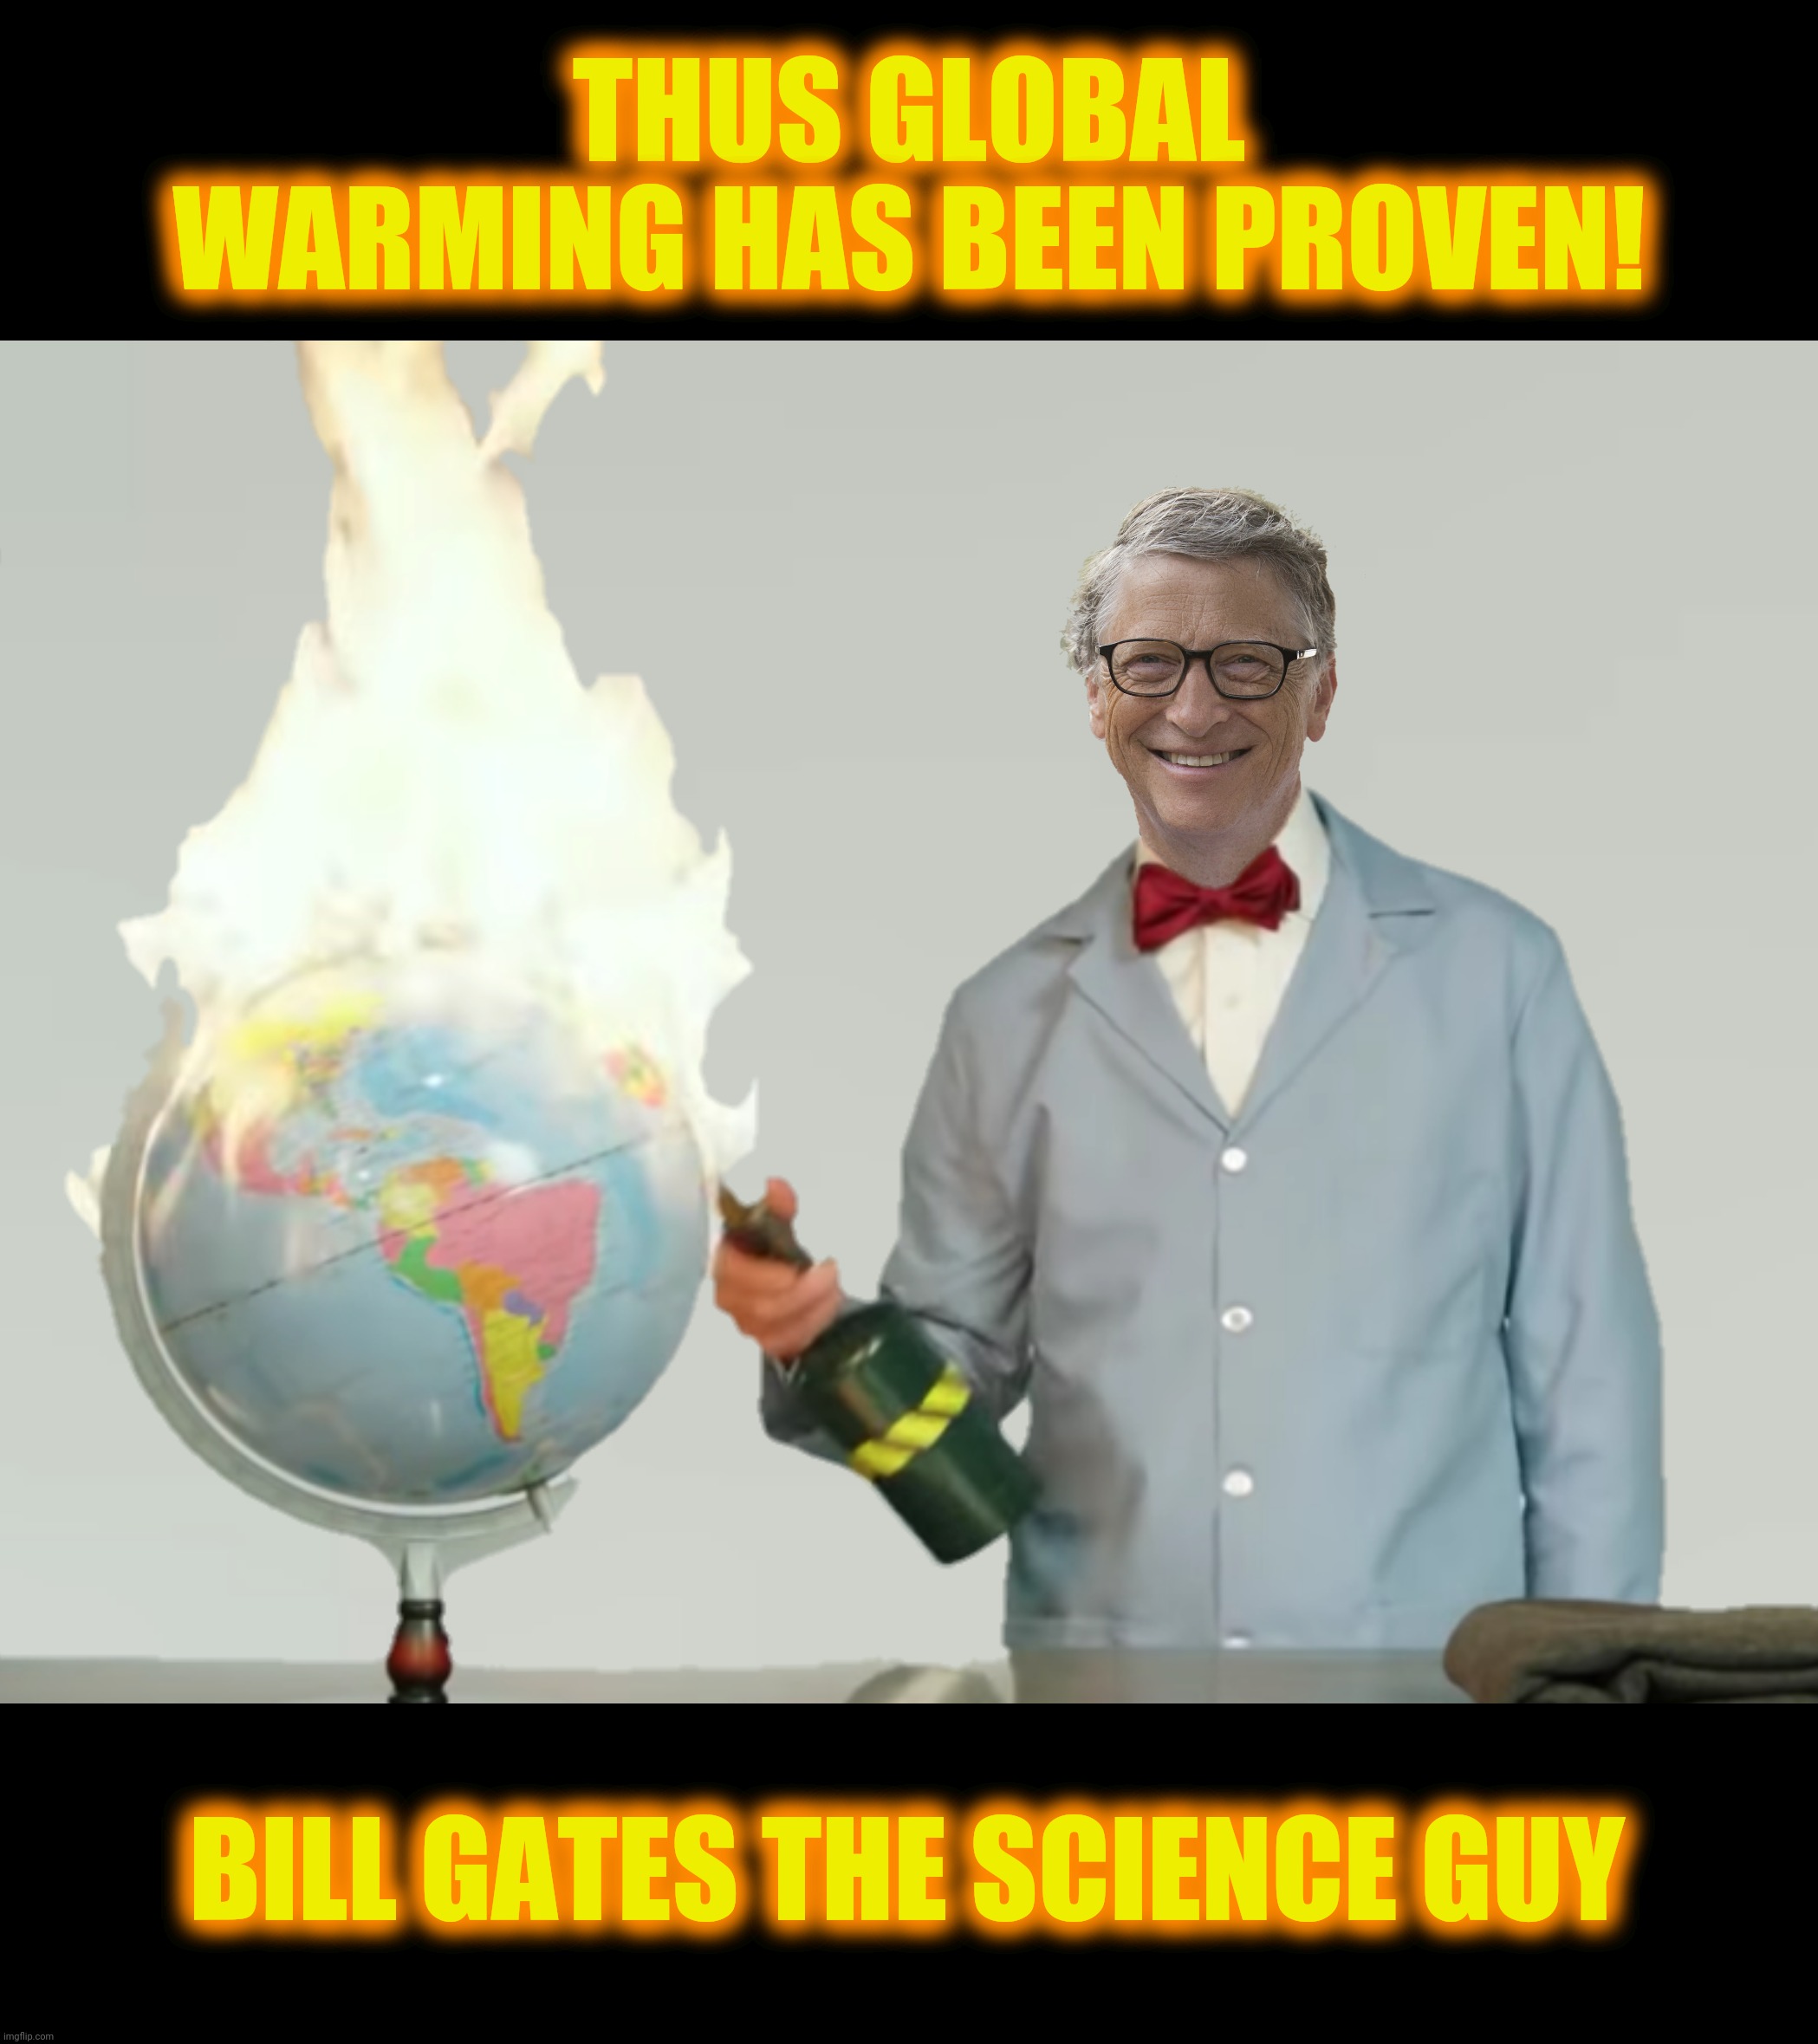 THUS GLOBAL WARMING HAS BEEN PROVEN! BILL GATES THE SCIENCE GUY | made w/ Imgflip meme maker